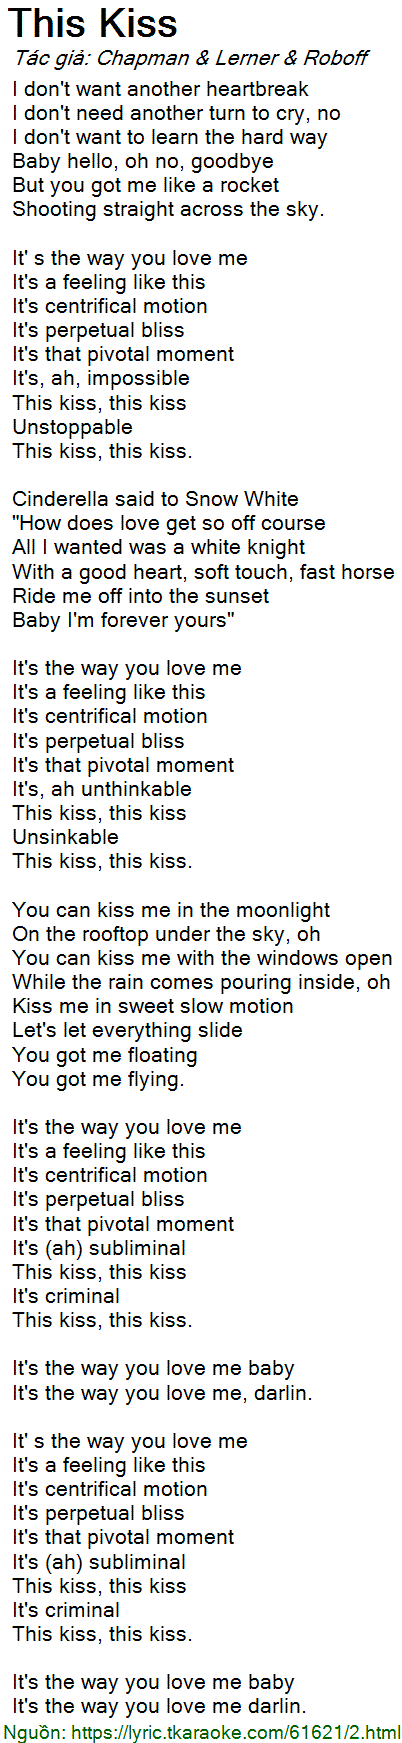 This kiss, this kiss - unstoppable!